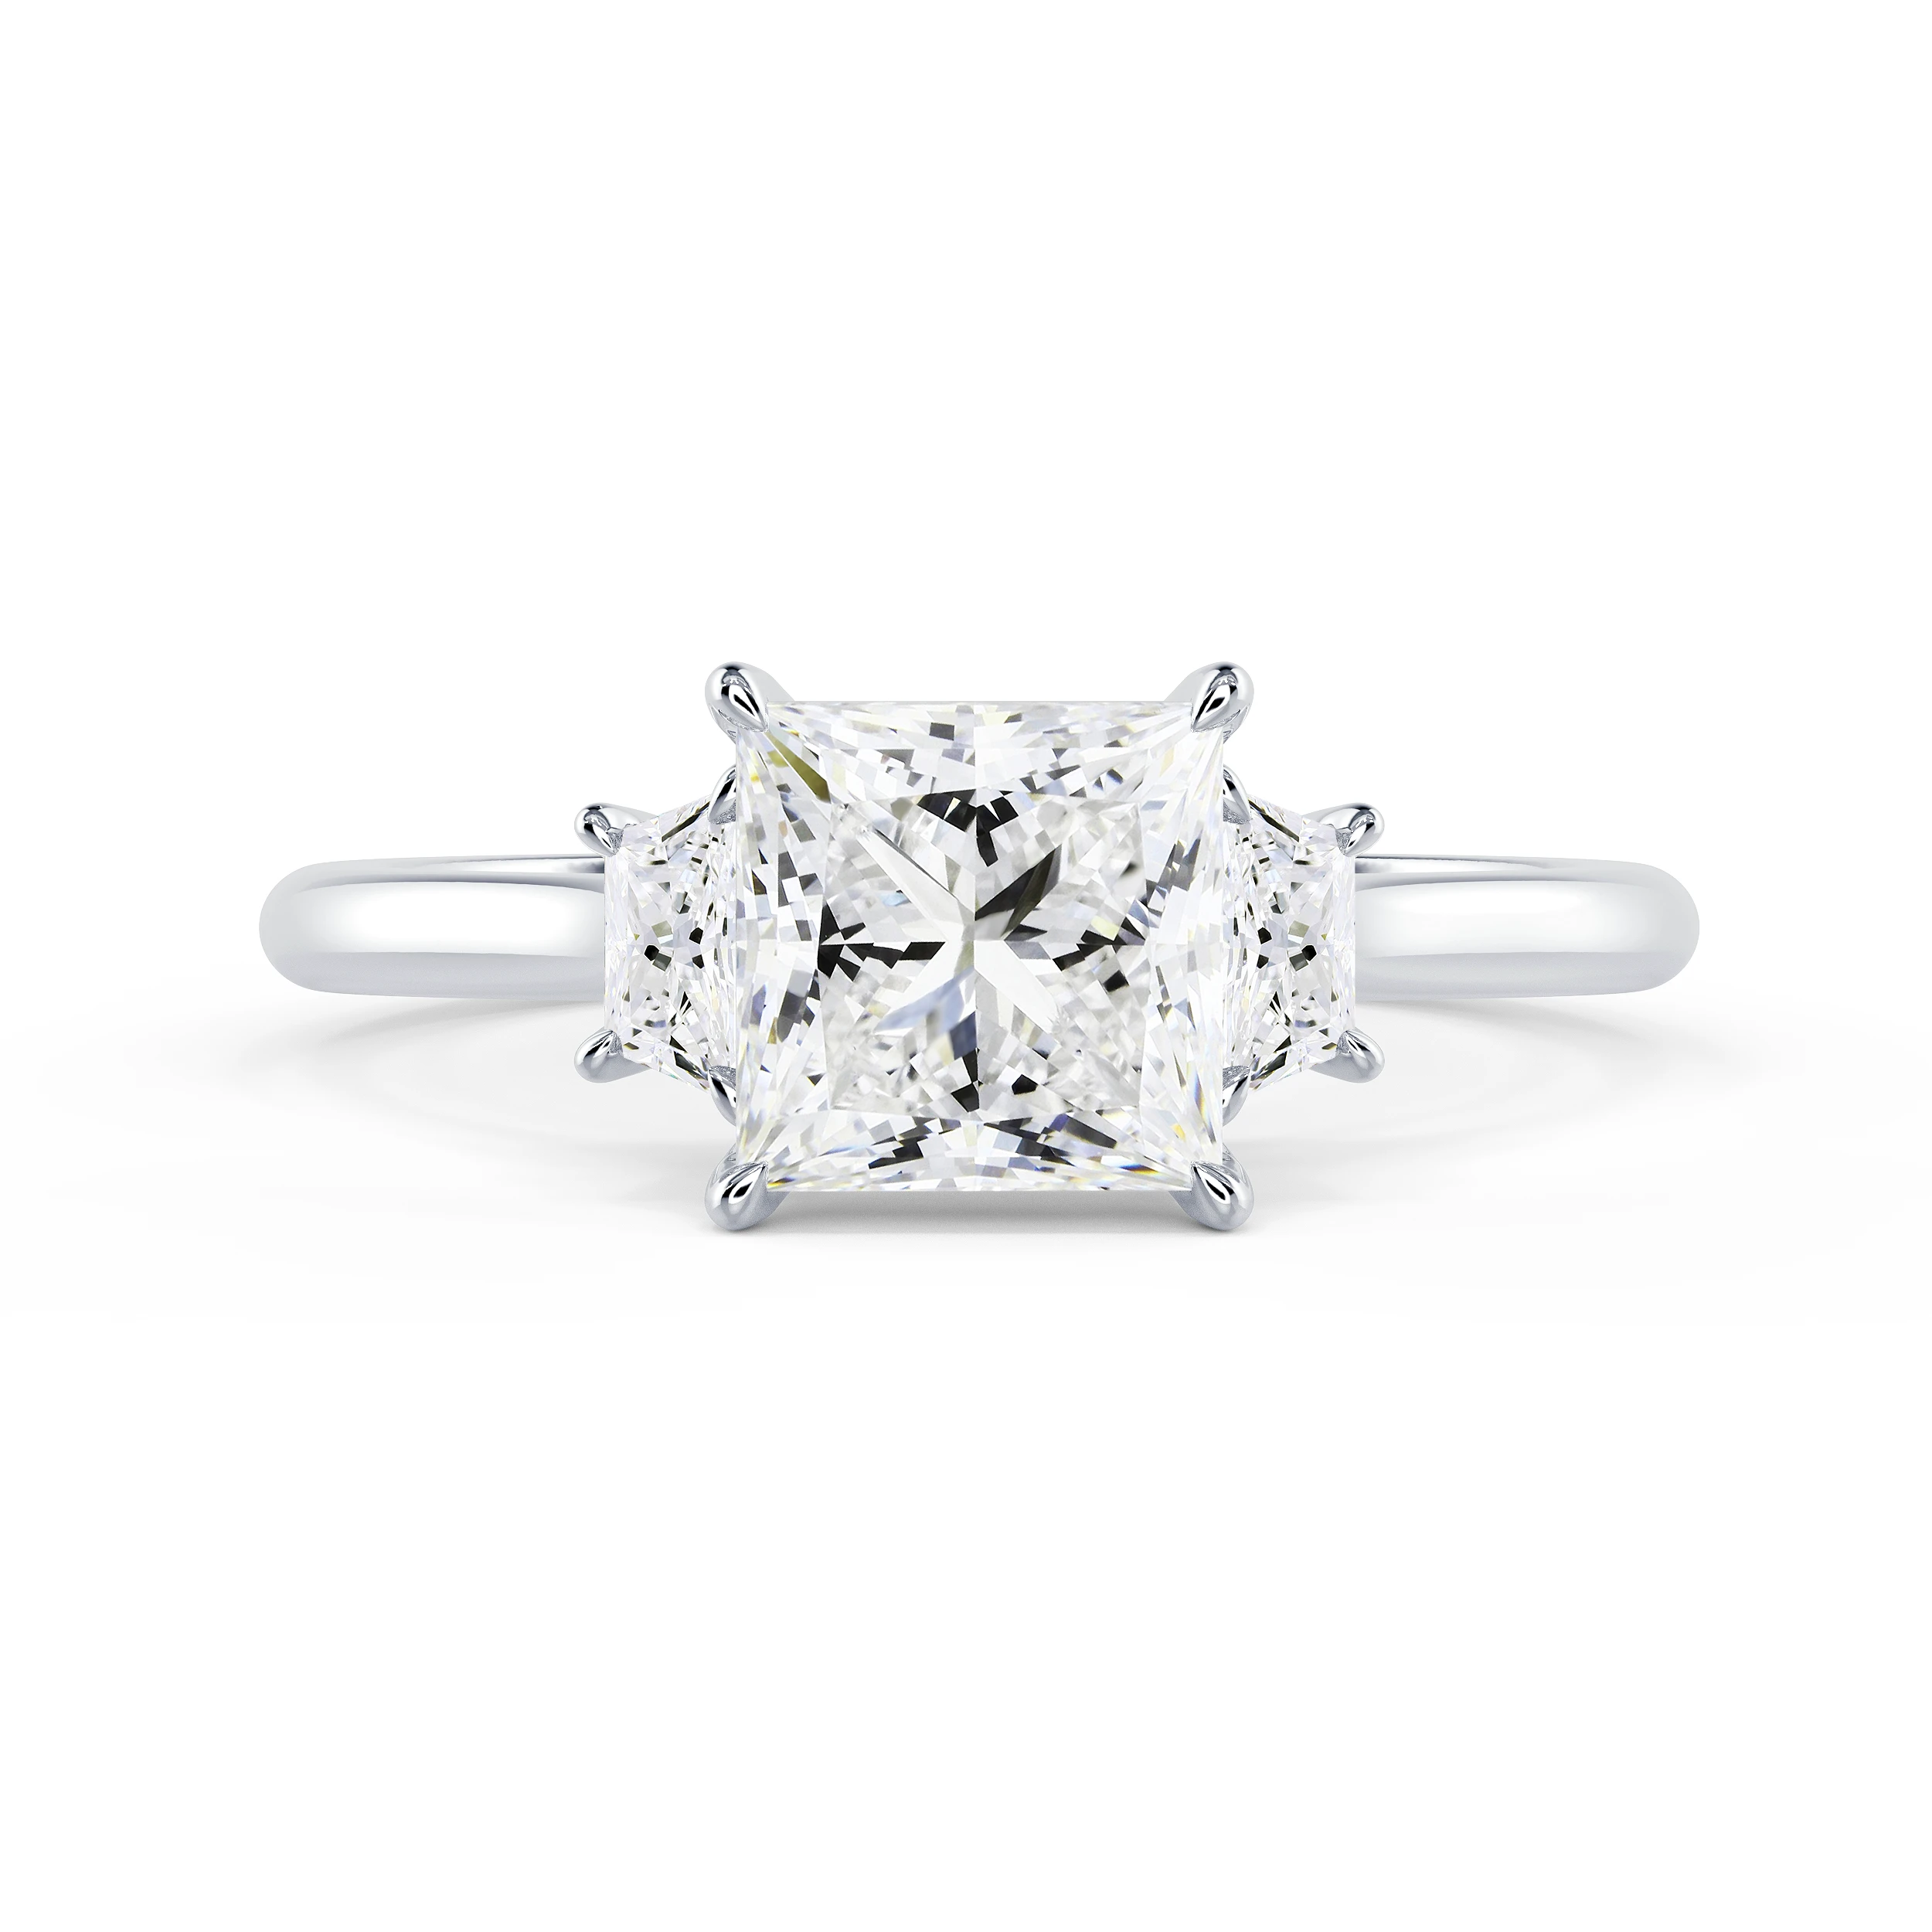 White Gold Princess and Trapezoid Diamond Engagement Ring featuring Lab Diamonds (Main View)